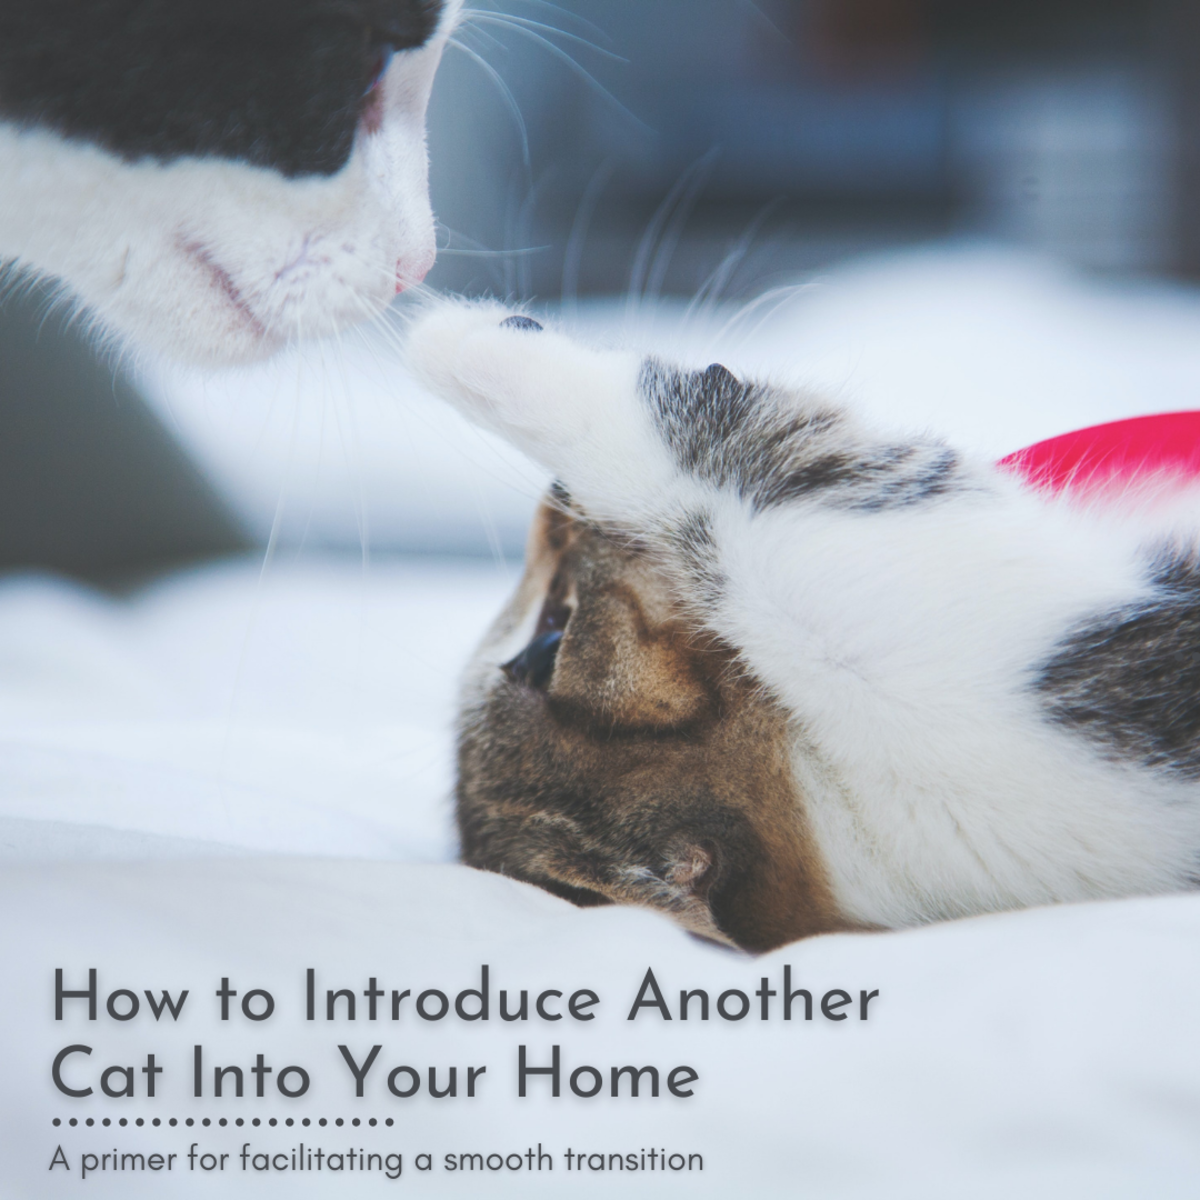 How to Introduce Another Cat Into Your Home